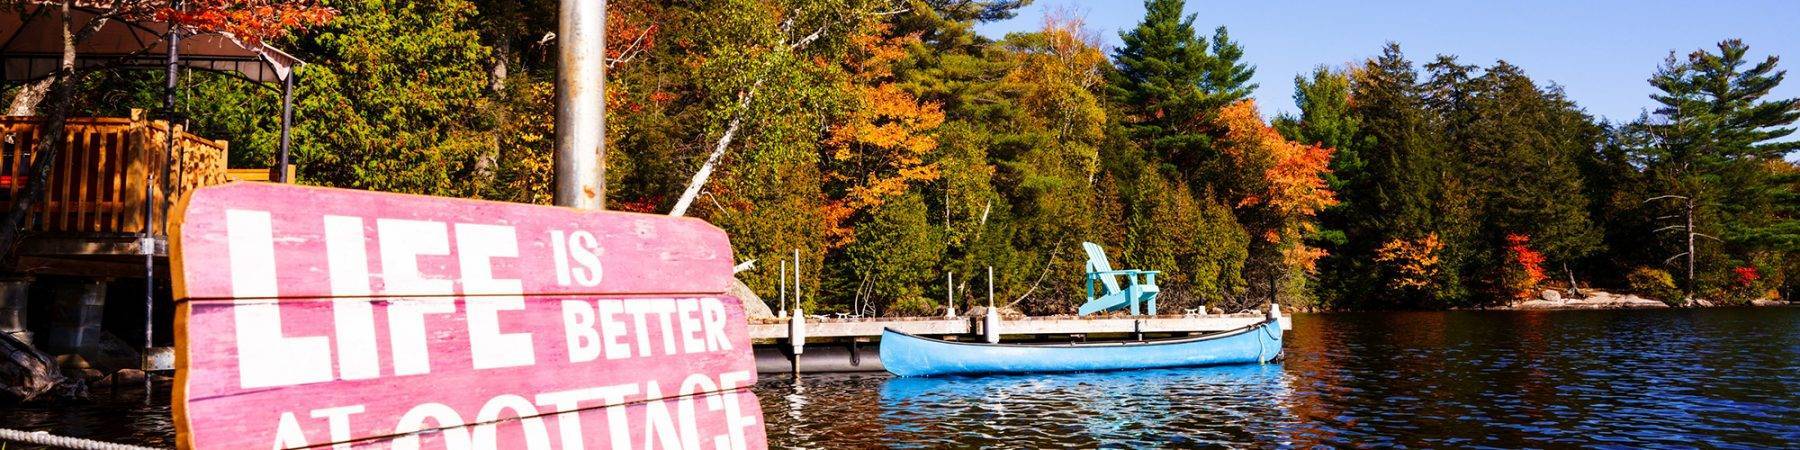 Affordable Muskoka Cottage Ownership is within reach at Great Blue Resorts